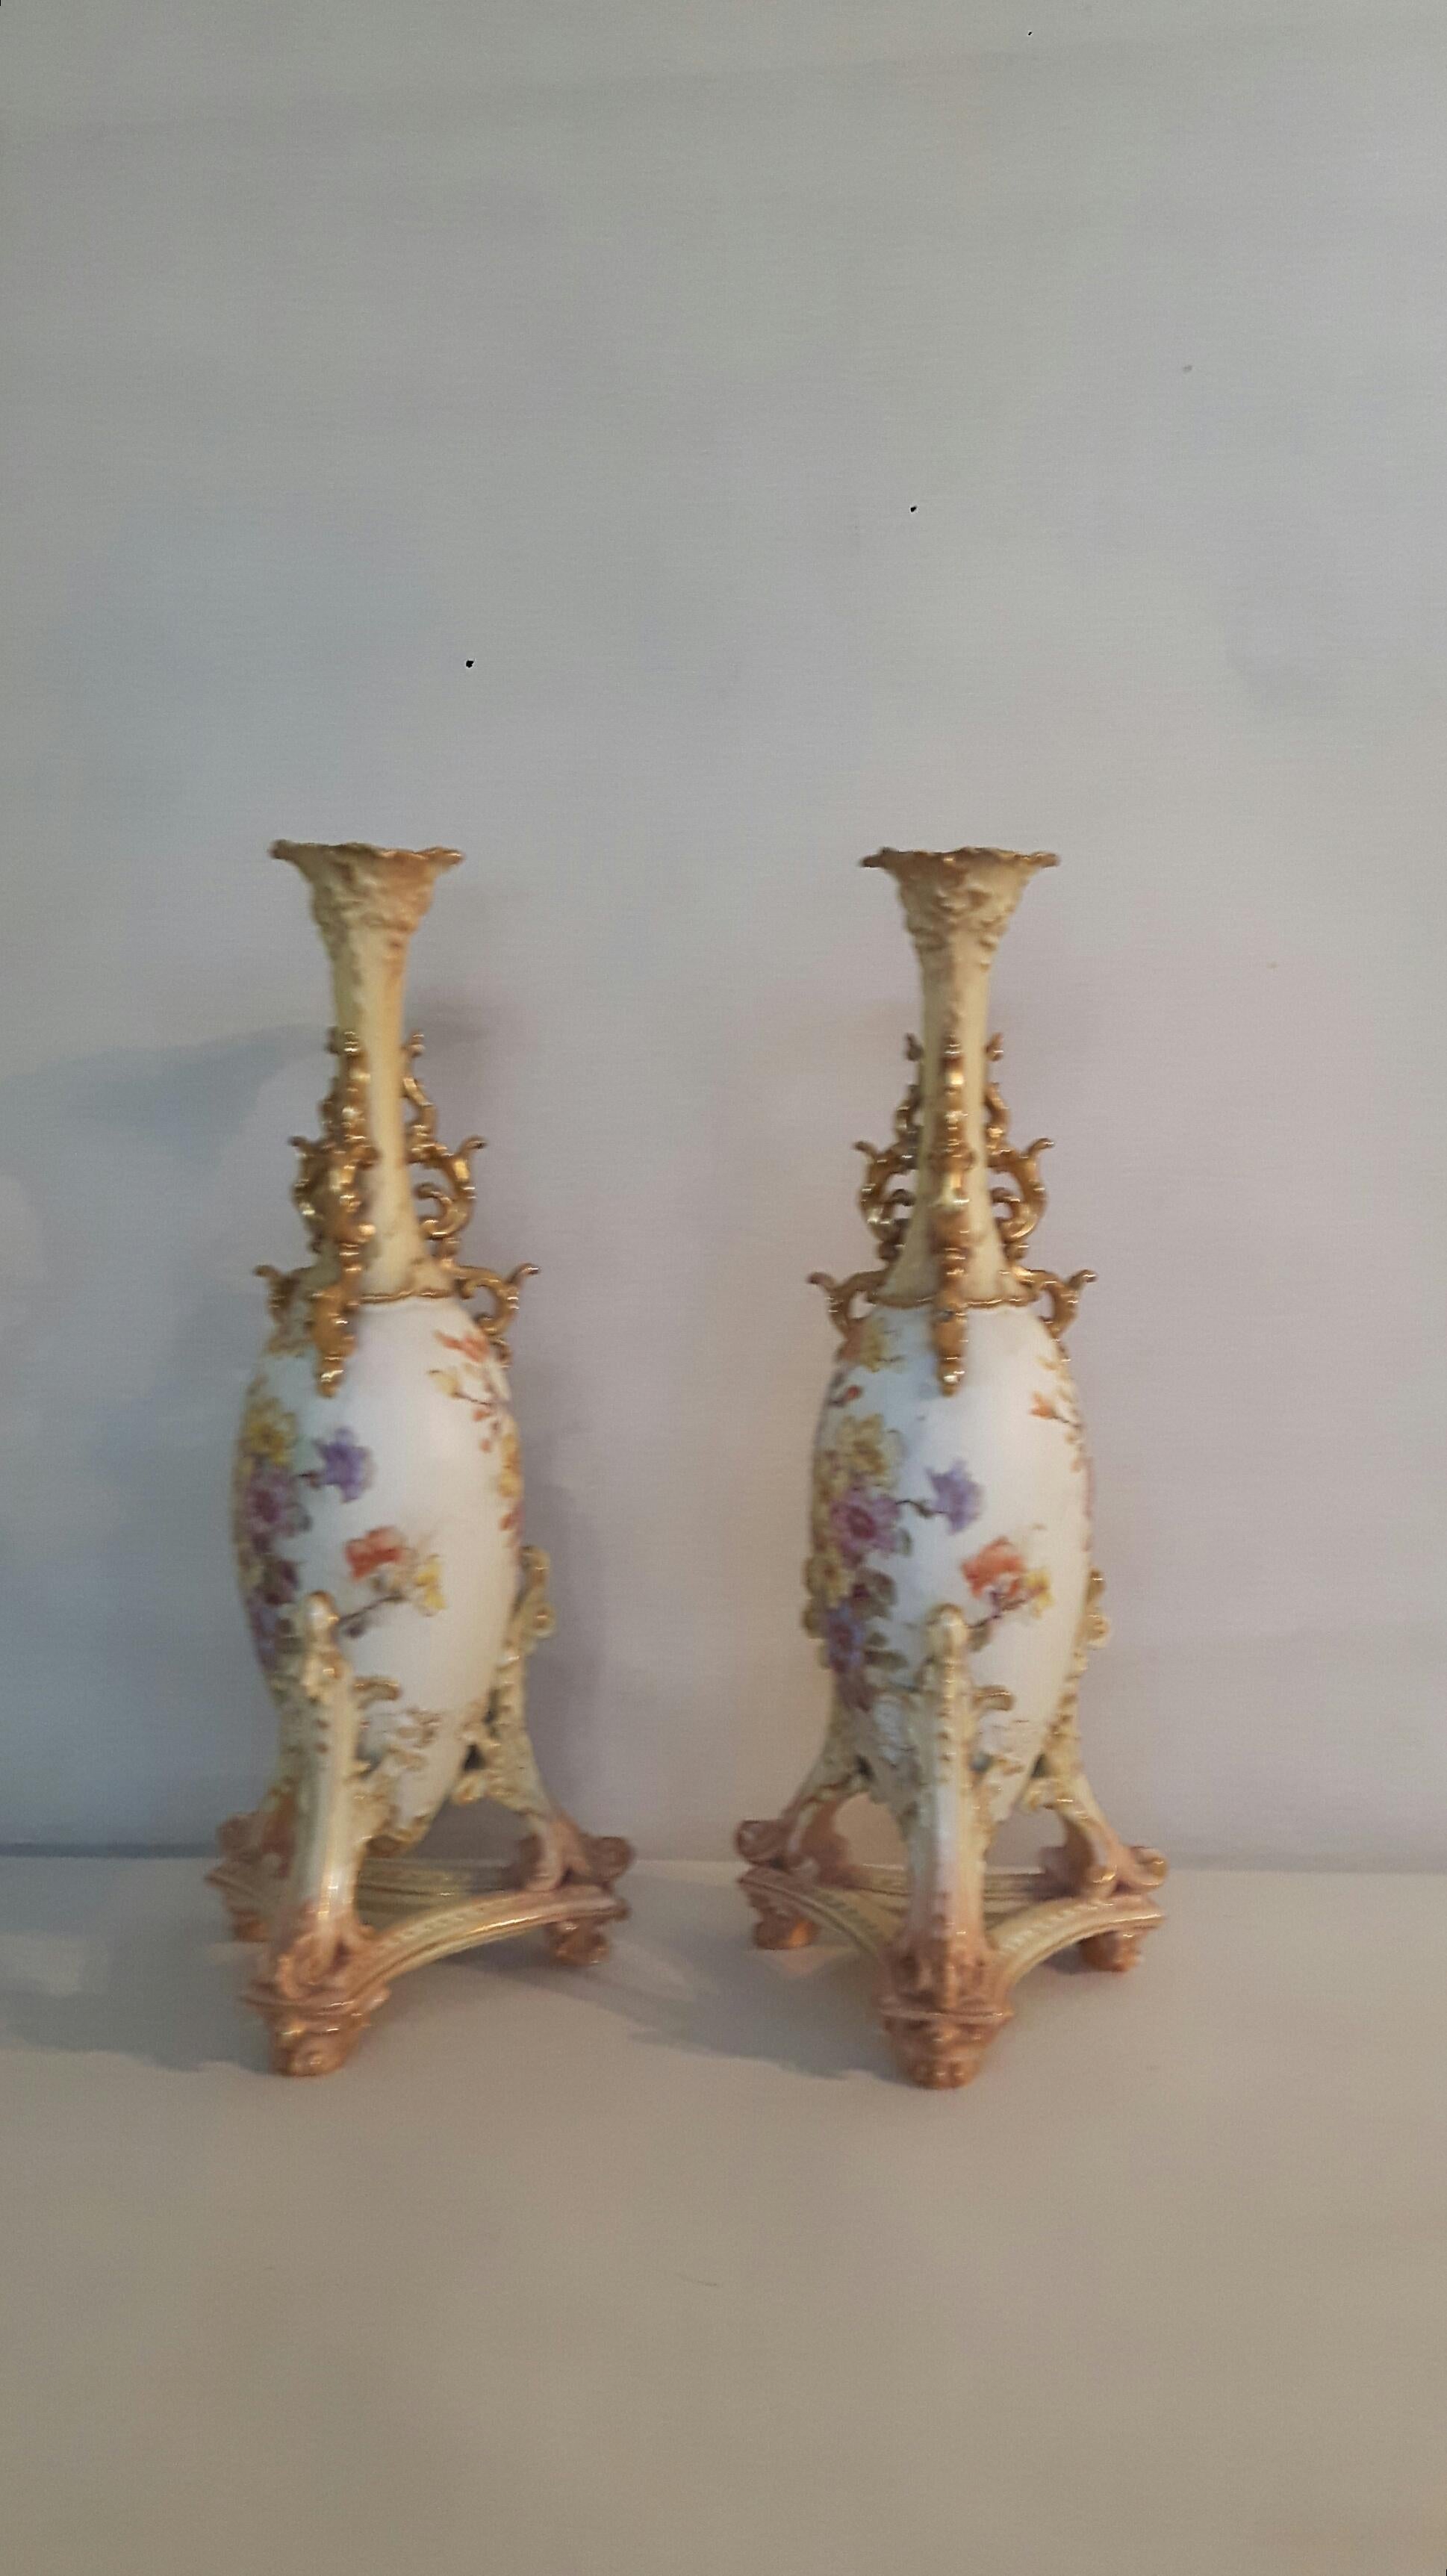 Glazed Pair of Early 20th Century Rudolfstadt Vases For Sale